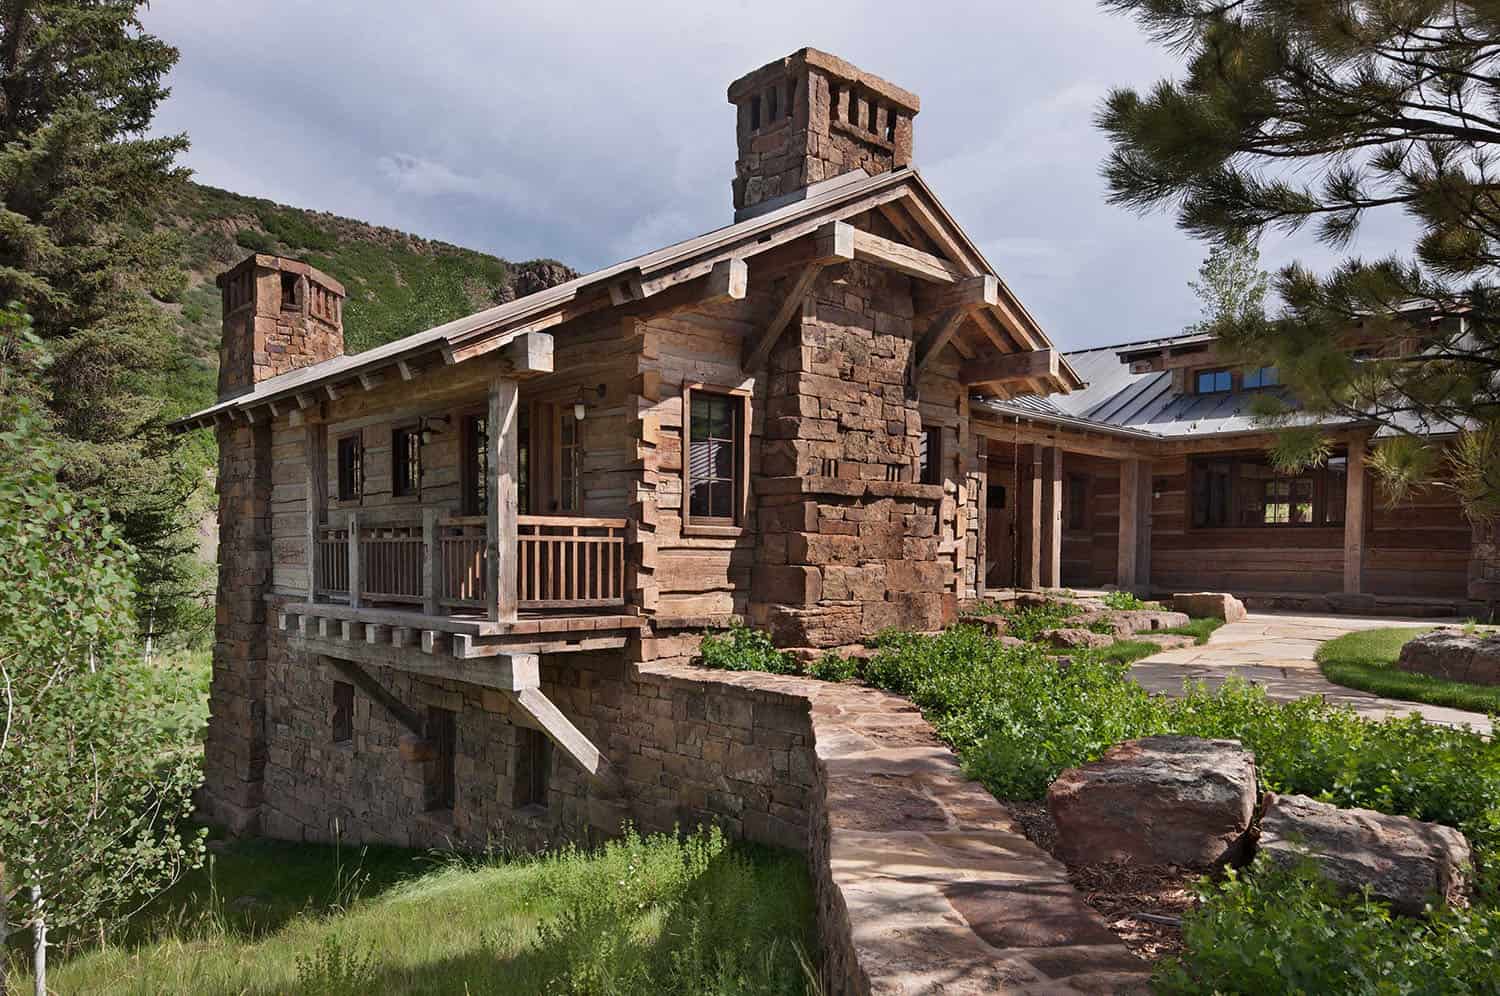 A stunning ranch house transformation in the mountains of Old Snowmass